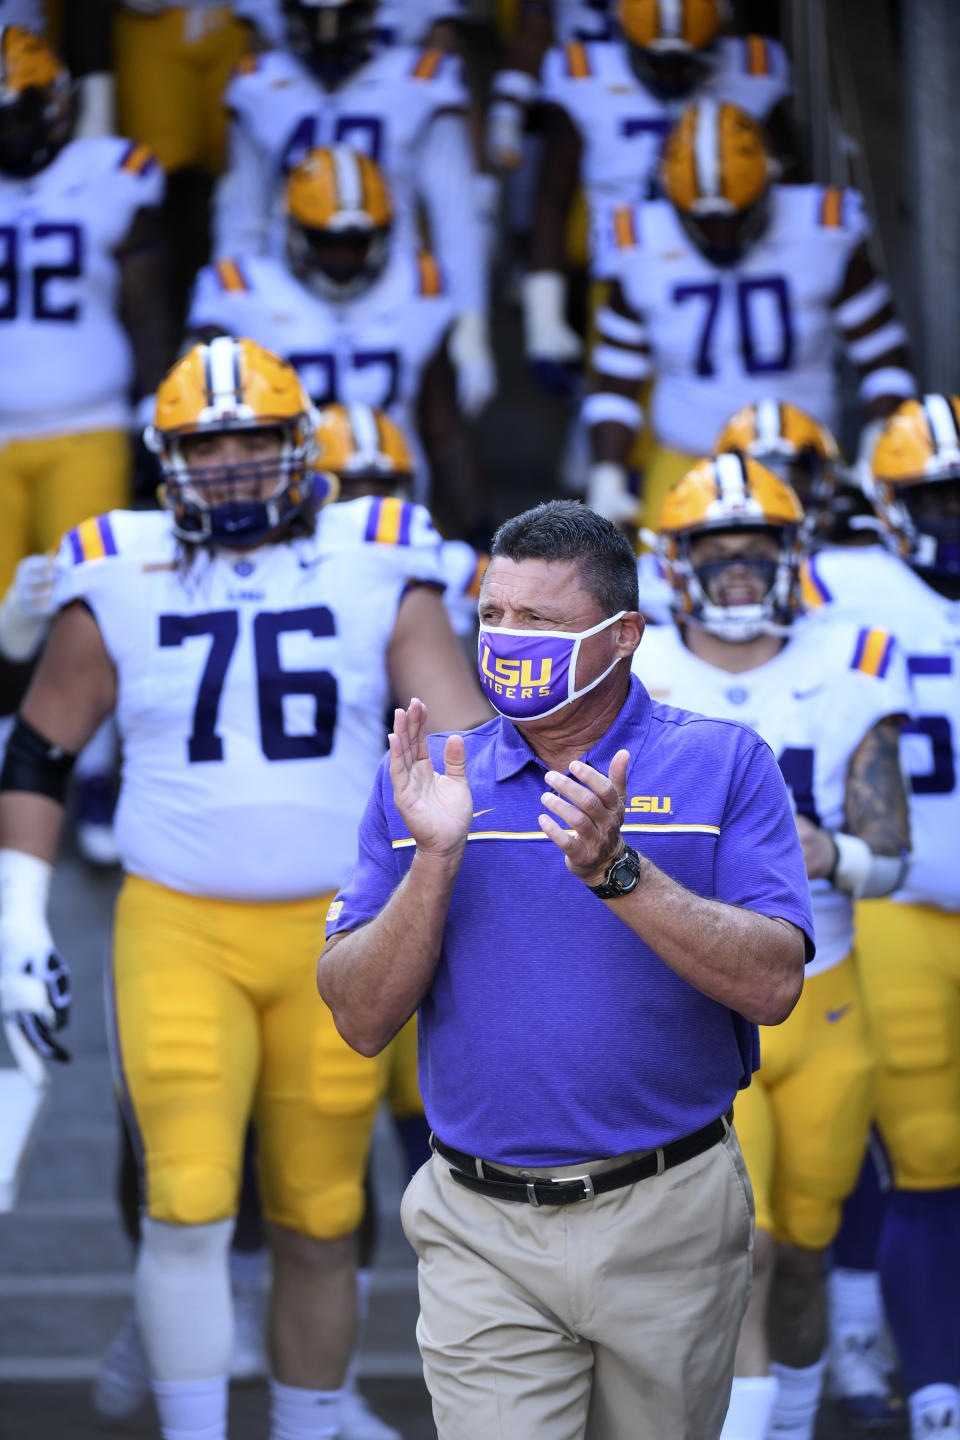 LSU head coach Ed Orgeron heads to the field with his team before the start an NCAA college football game against Missouri Saturday, Oct. 10, 2020, in Columbia, Mo. (AP Photo/L.G. Patterson)